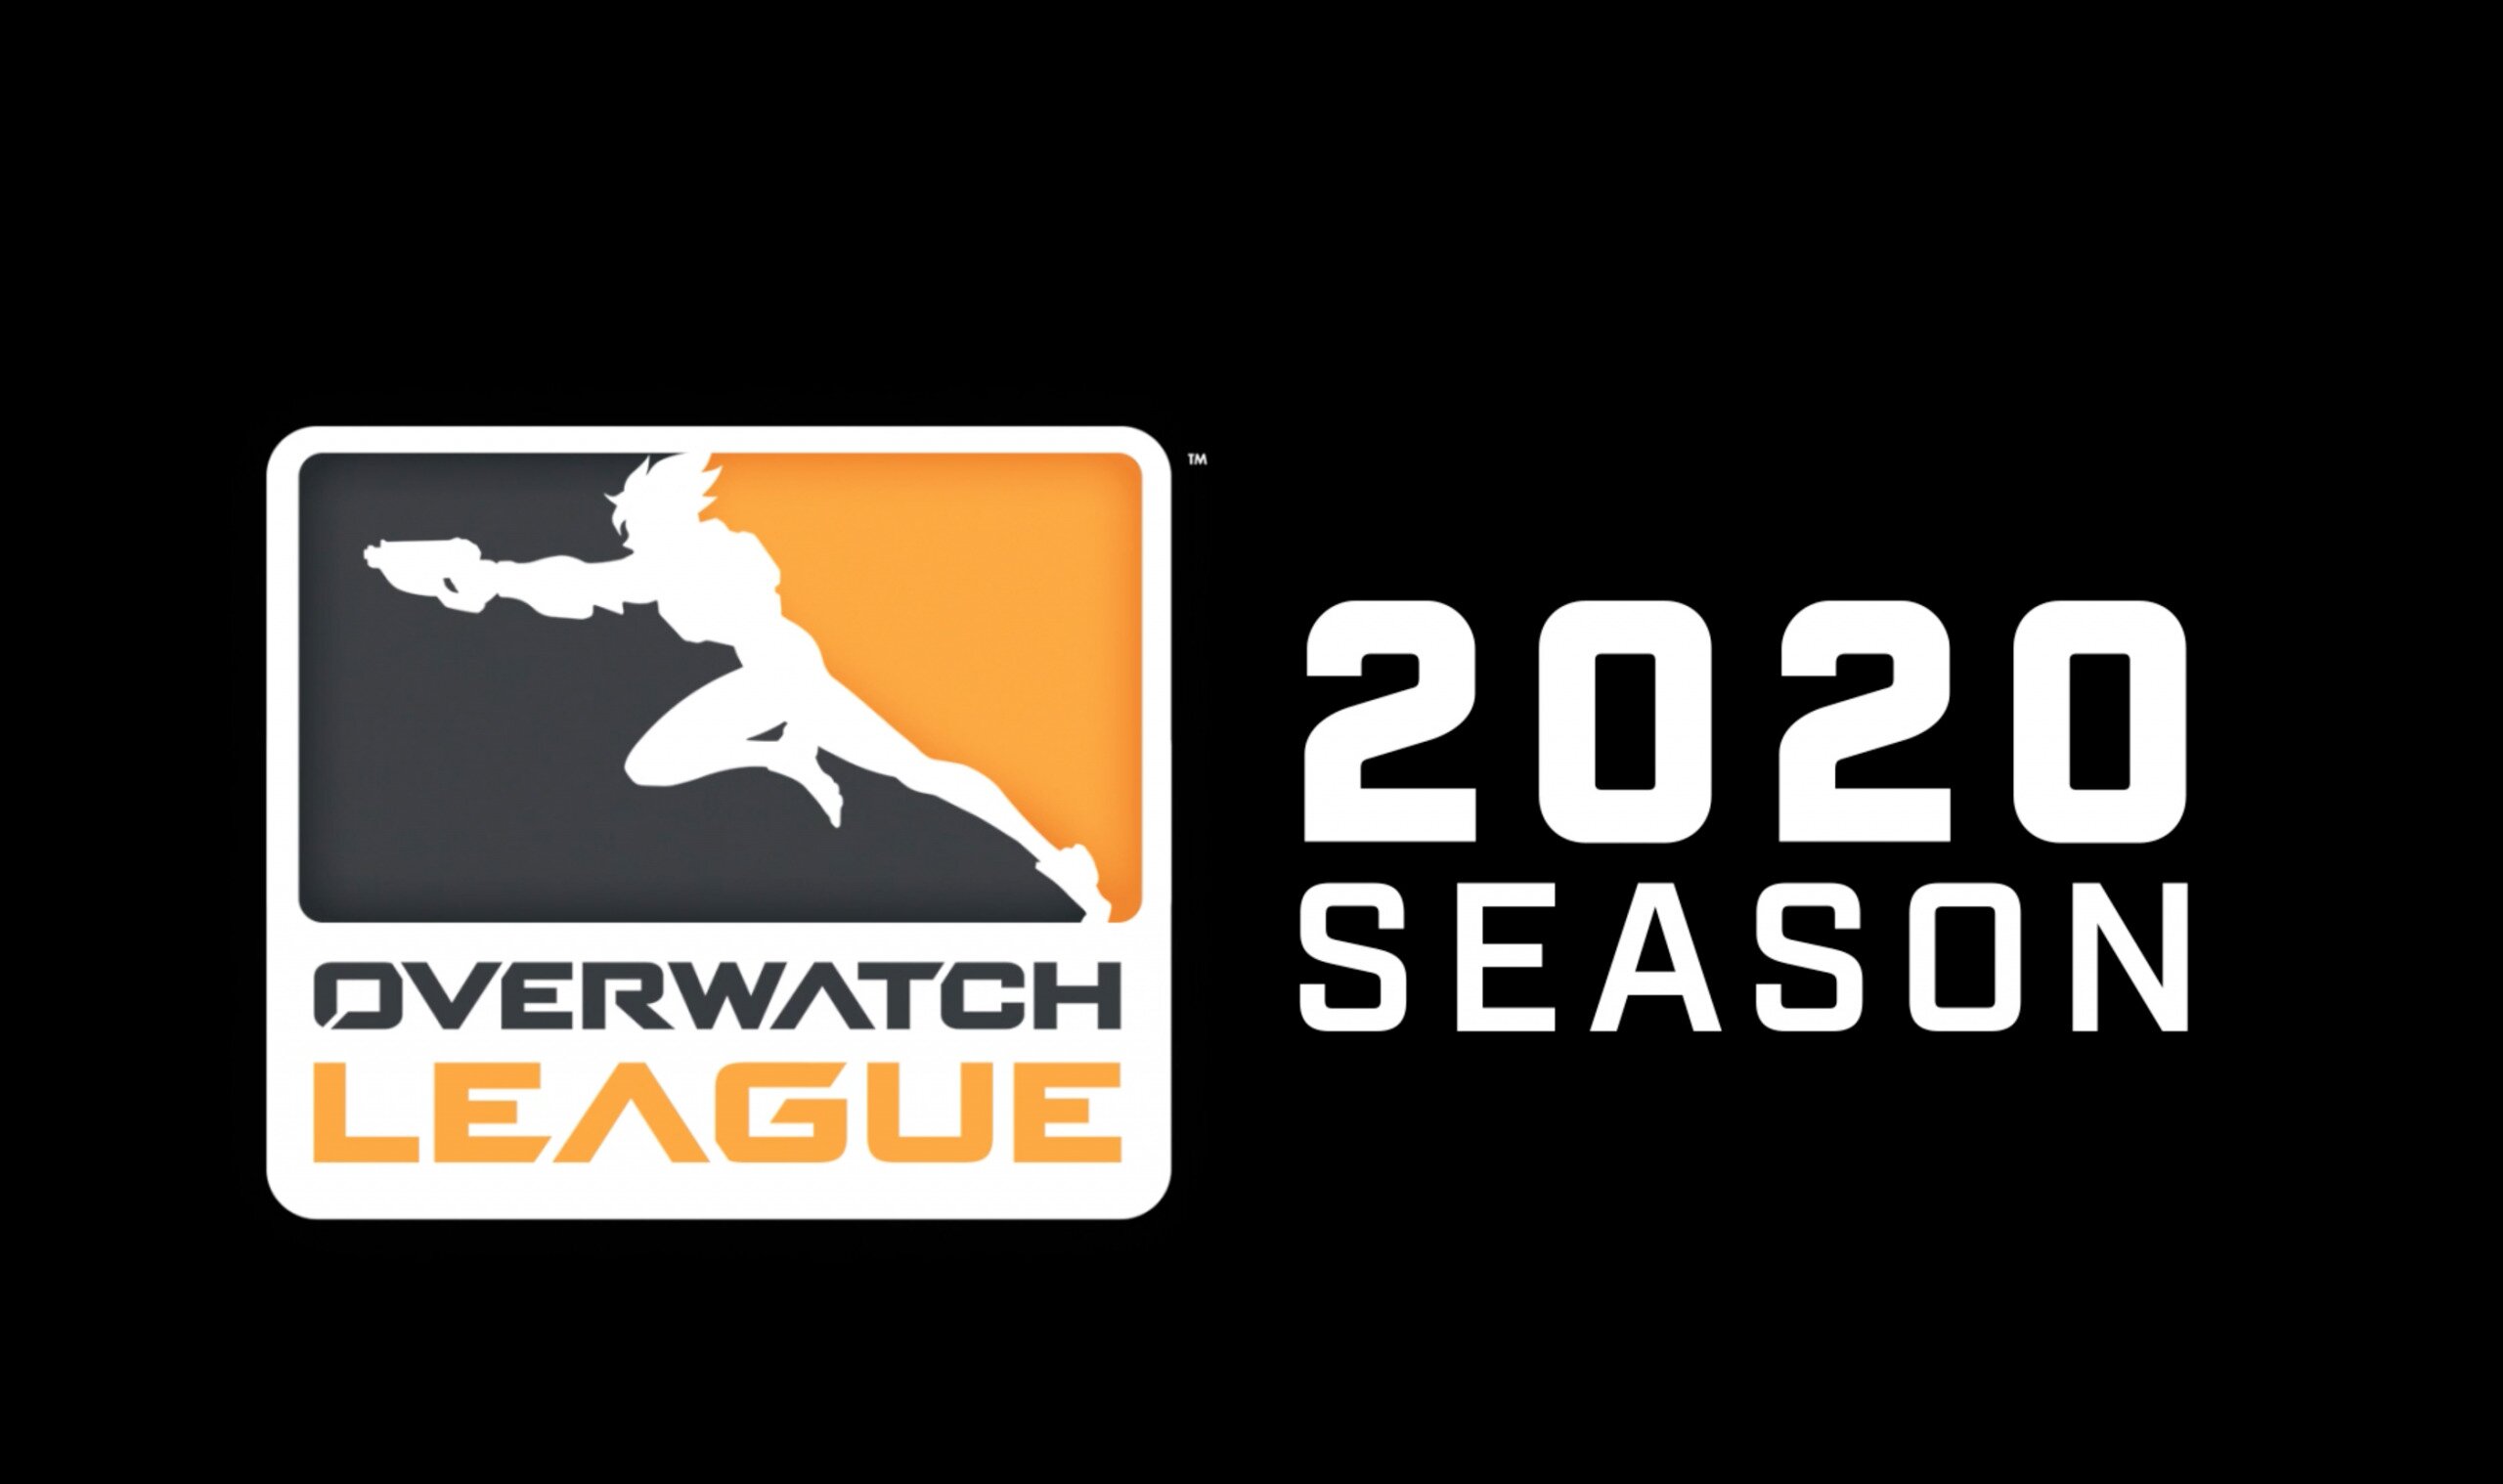 The Overwatch League announced a brand new division-based system, 52 homestand weekends and a new schedule for the upcoming 2020 season.